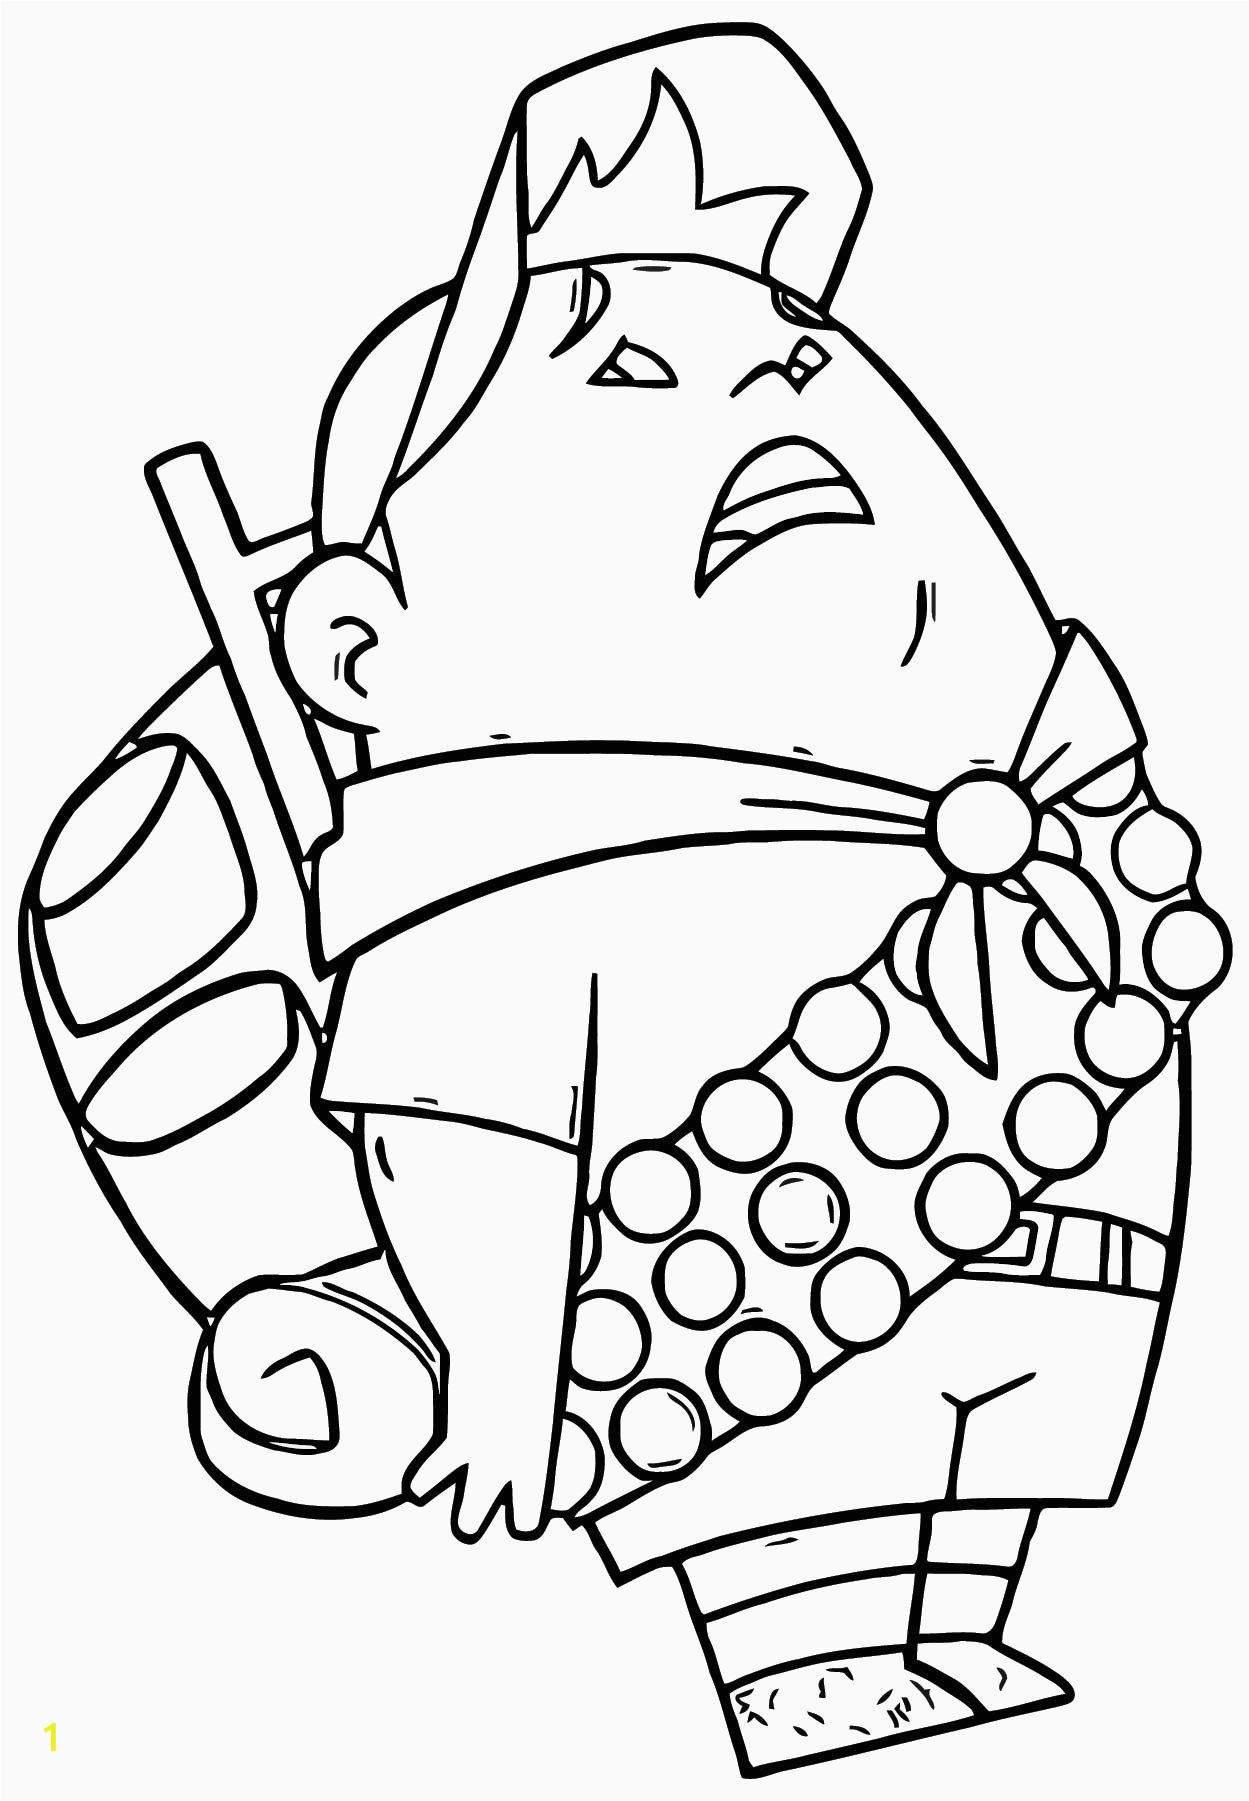 Disney Inside Out Coloring Pages Disney Pixar Coloring Pages In 2020